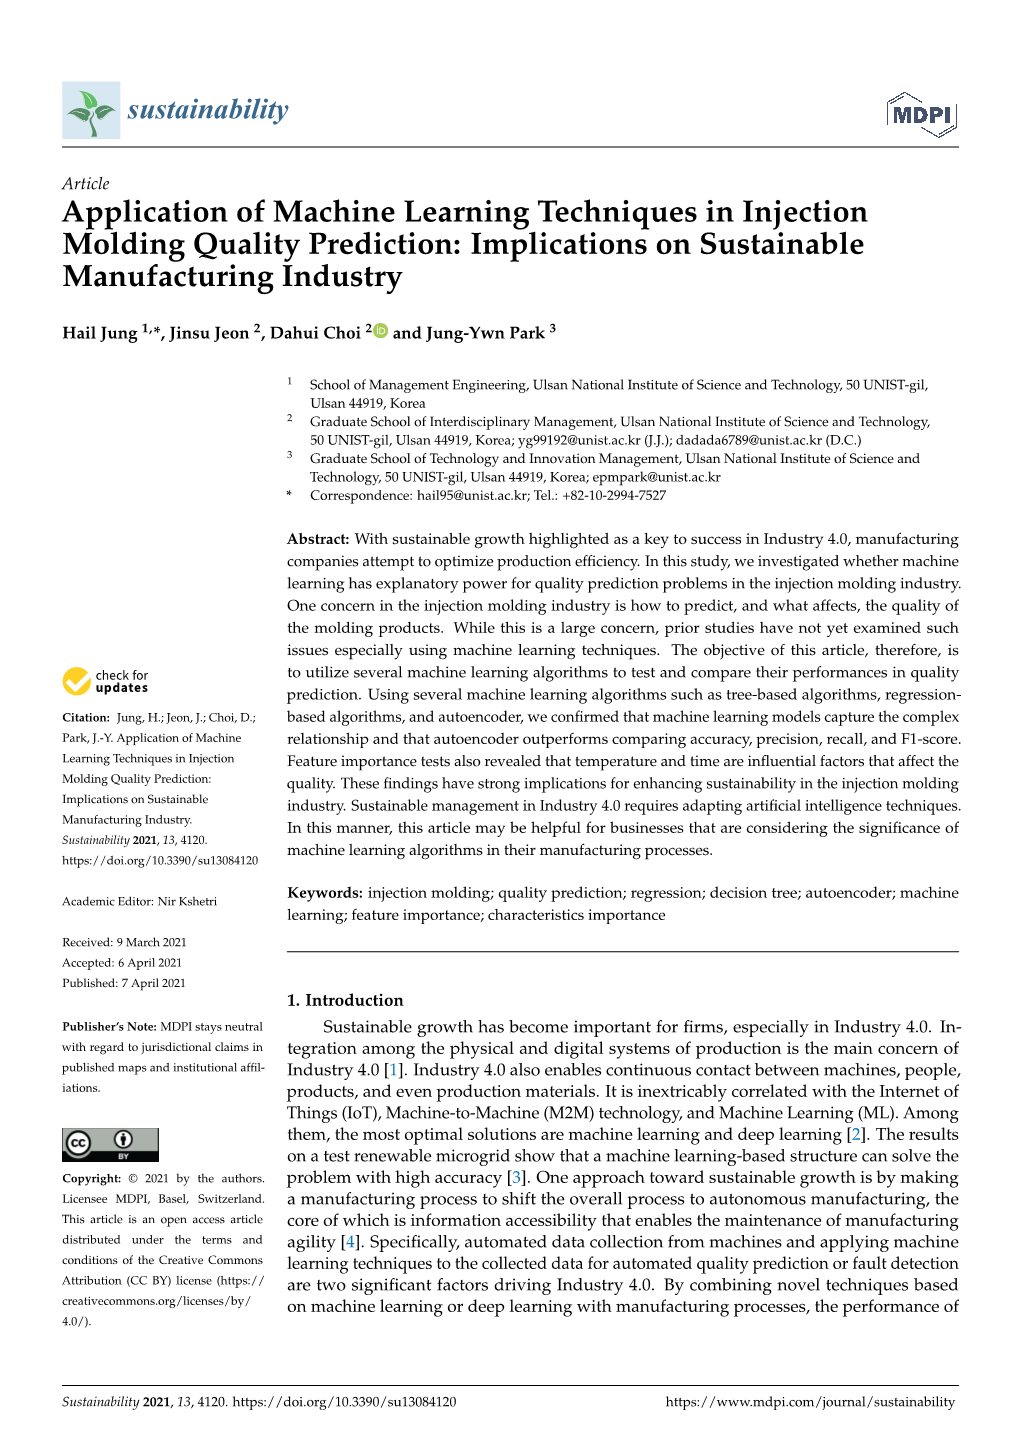 Application of Machine Learning Techniques in Injection Molding Quality Prediction: Implications on Sustainable Manufacturing Industry